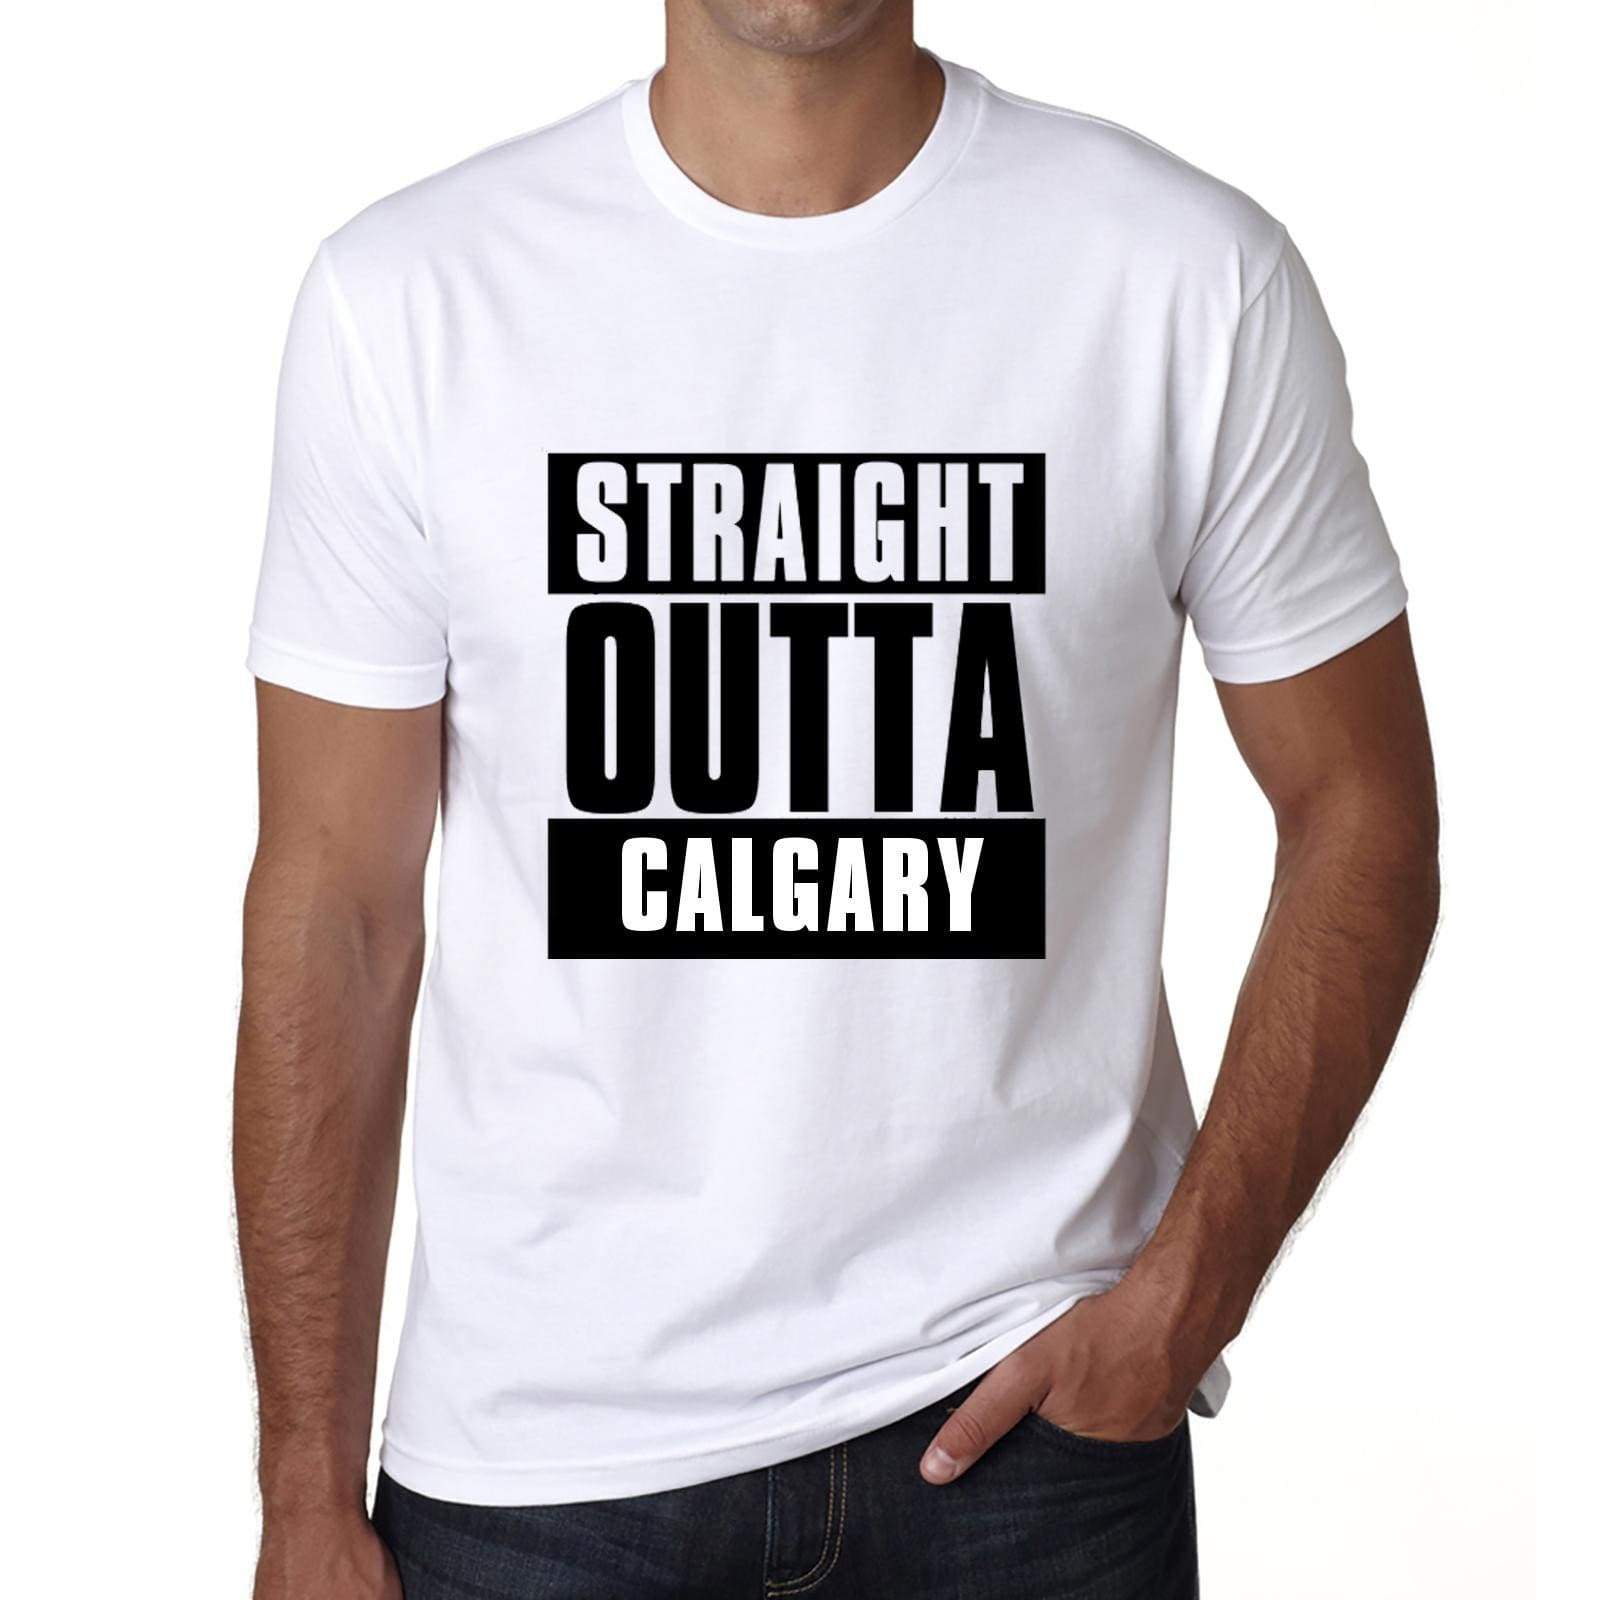 Straight Outta Calgary Mens Short Sleeve Round Neck T-Shirt 00027 - White / S - Casual